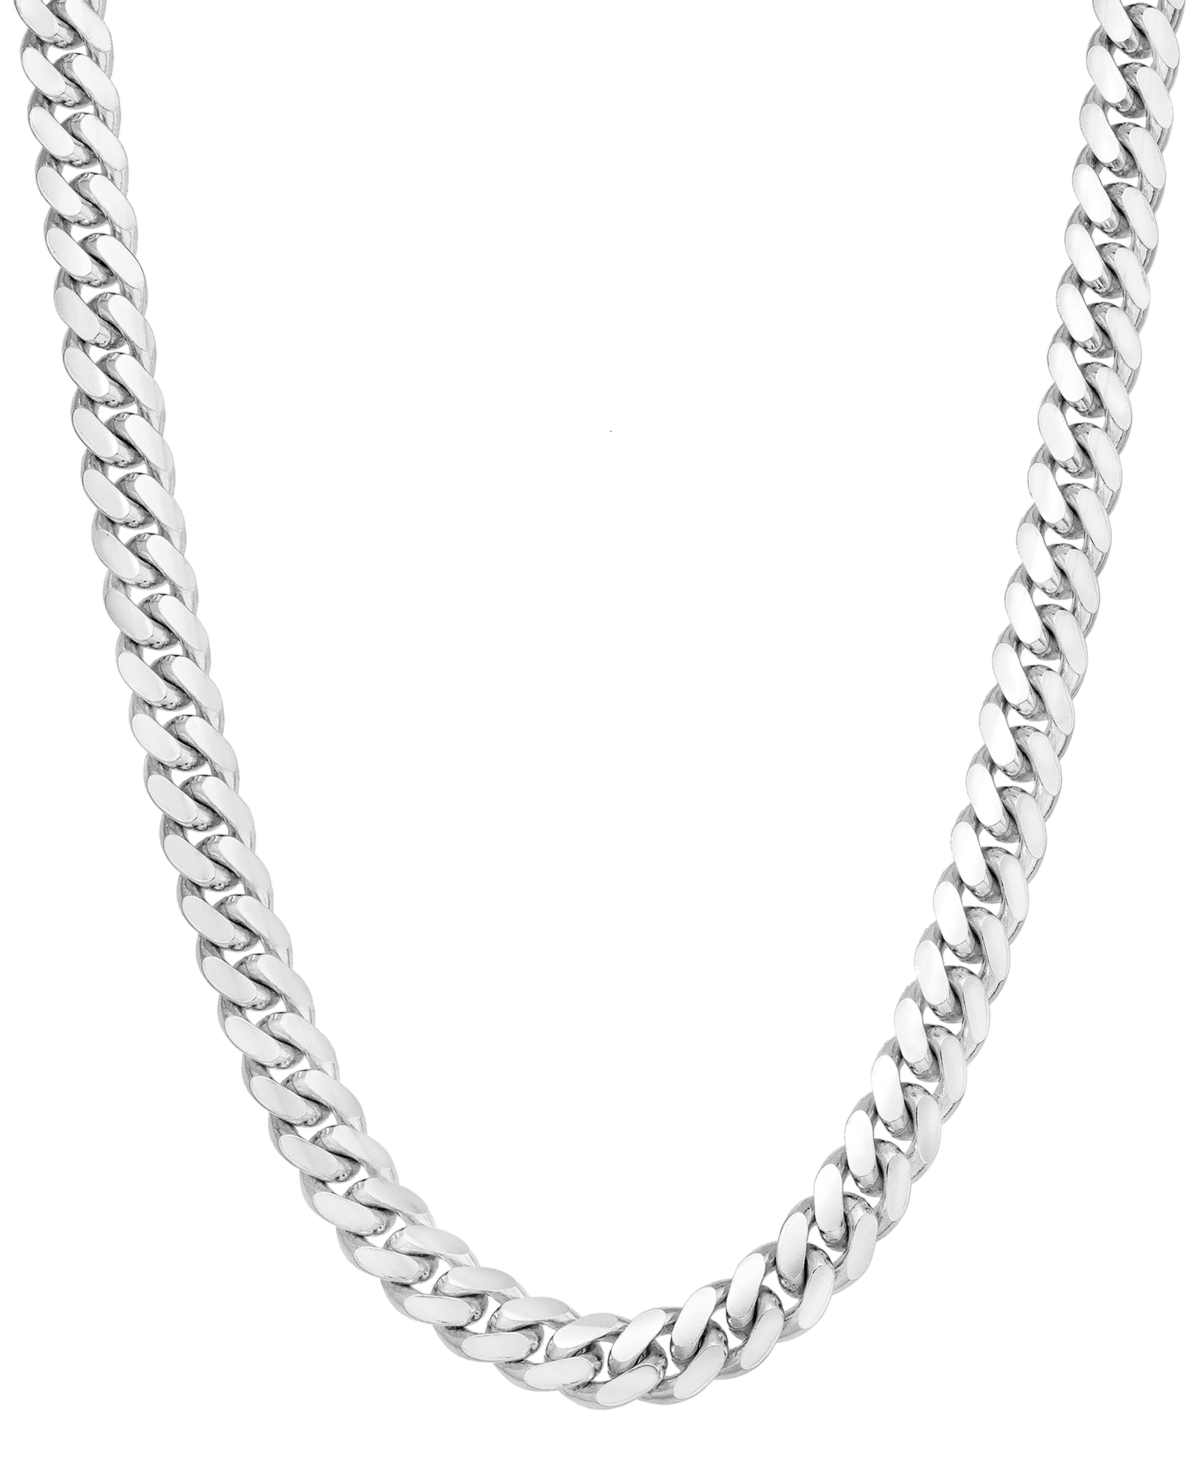 Men's Solid Cuban Link 24" Chain Necklace in Sterling Silver - Silver